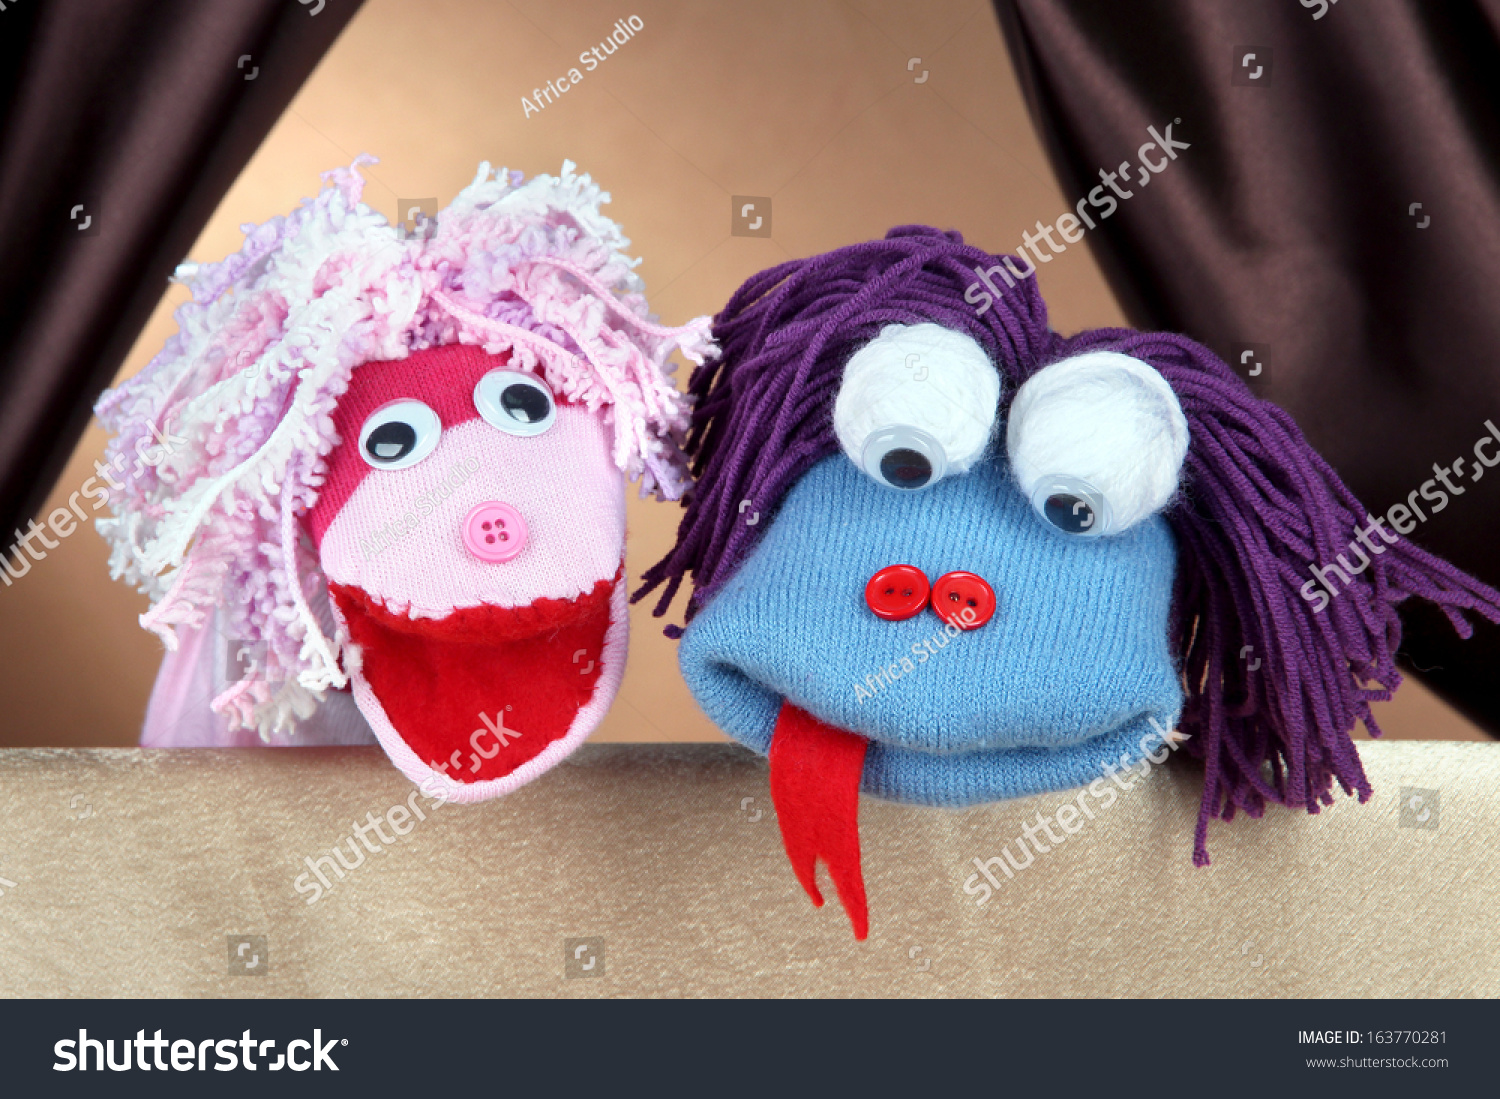 Puppet show on brown background #163770281